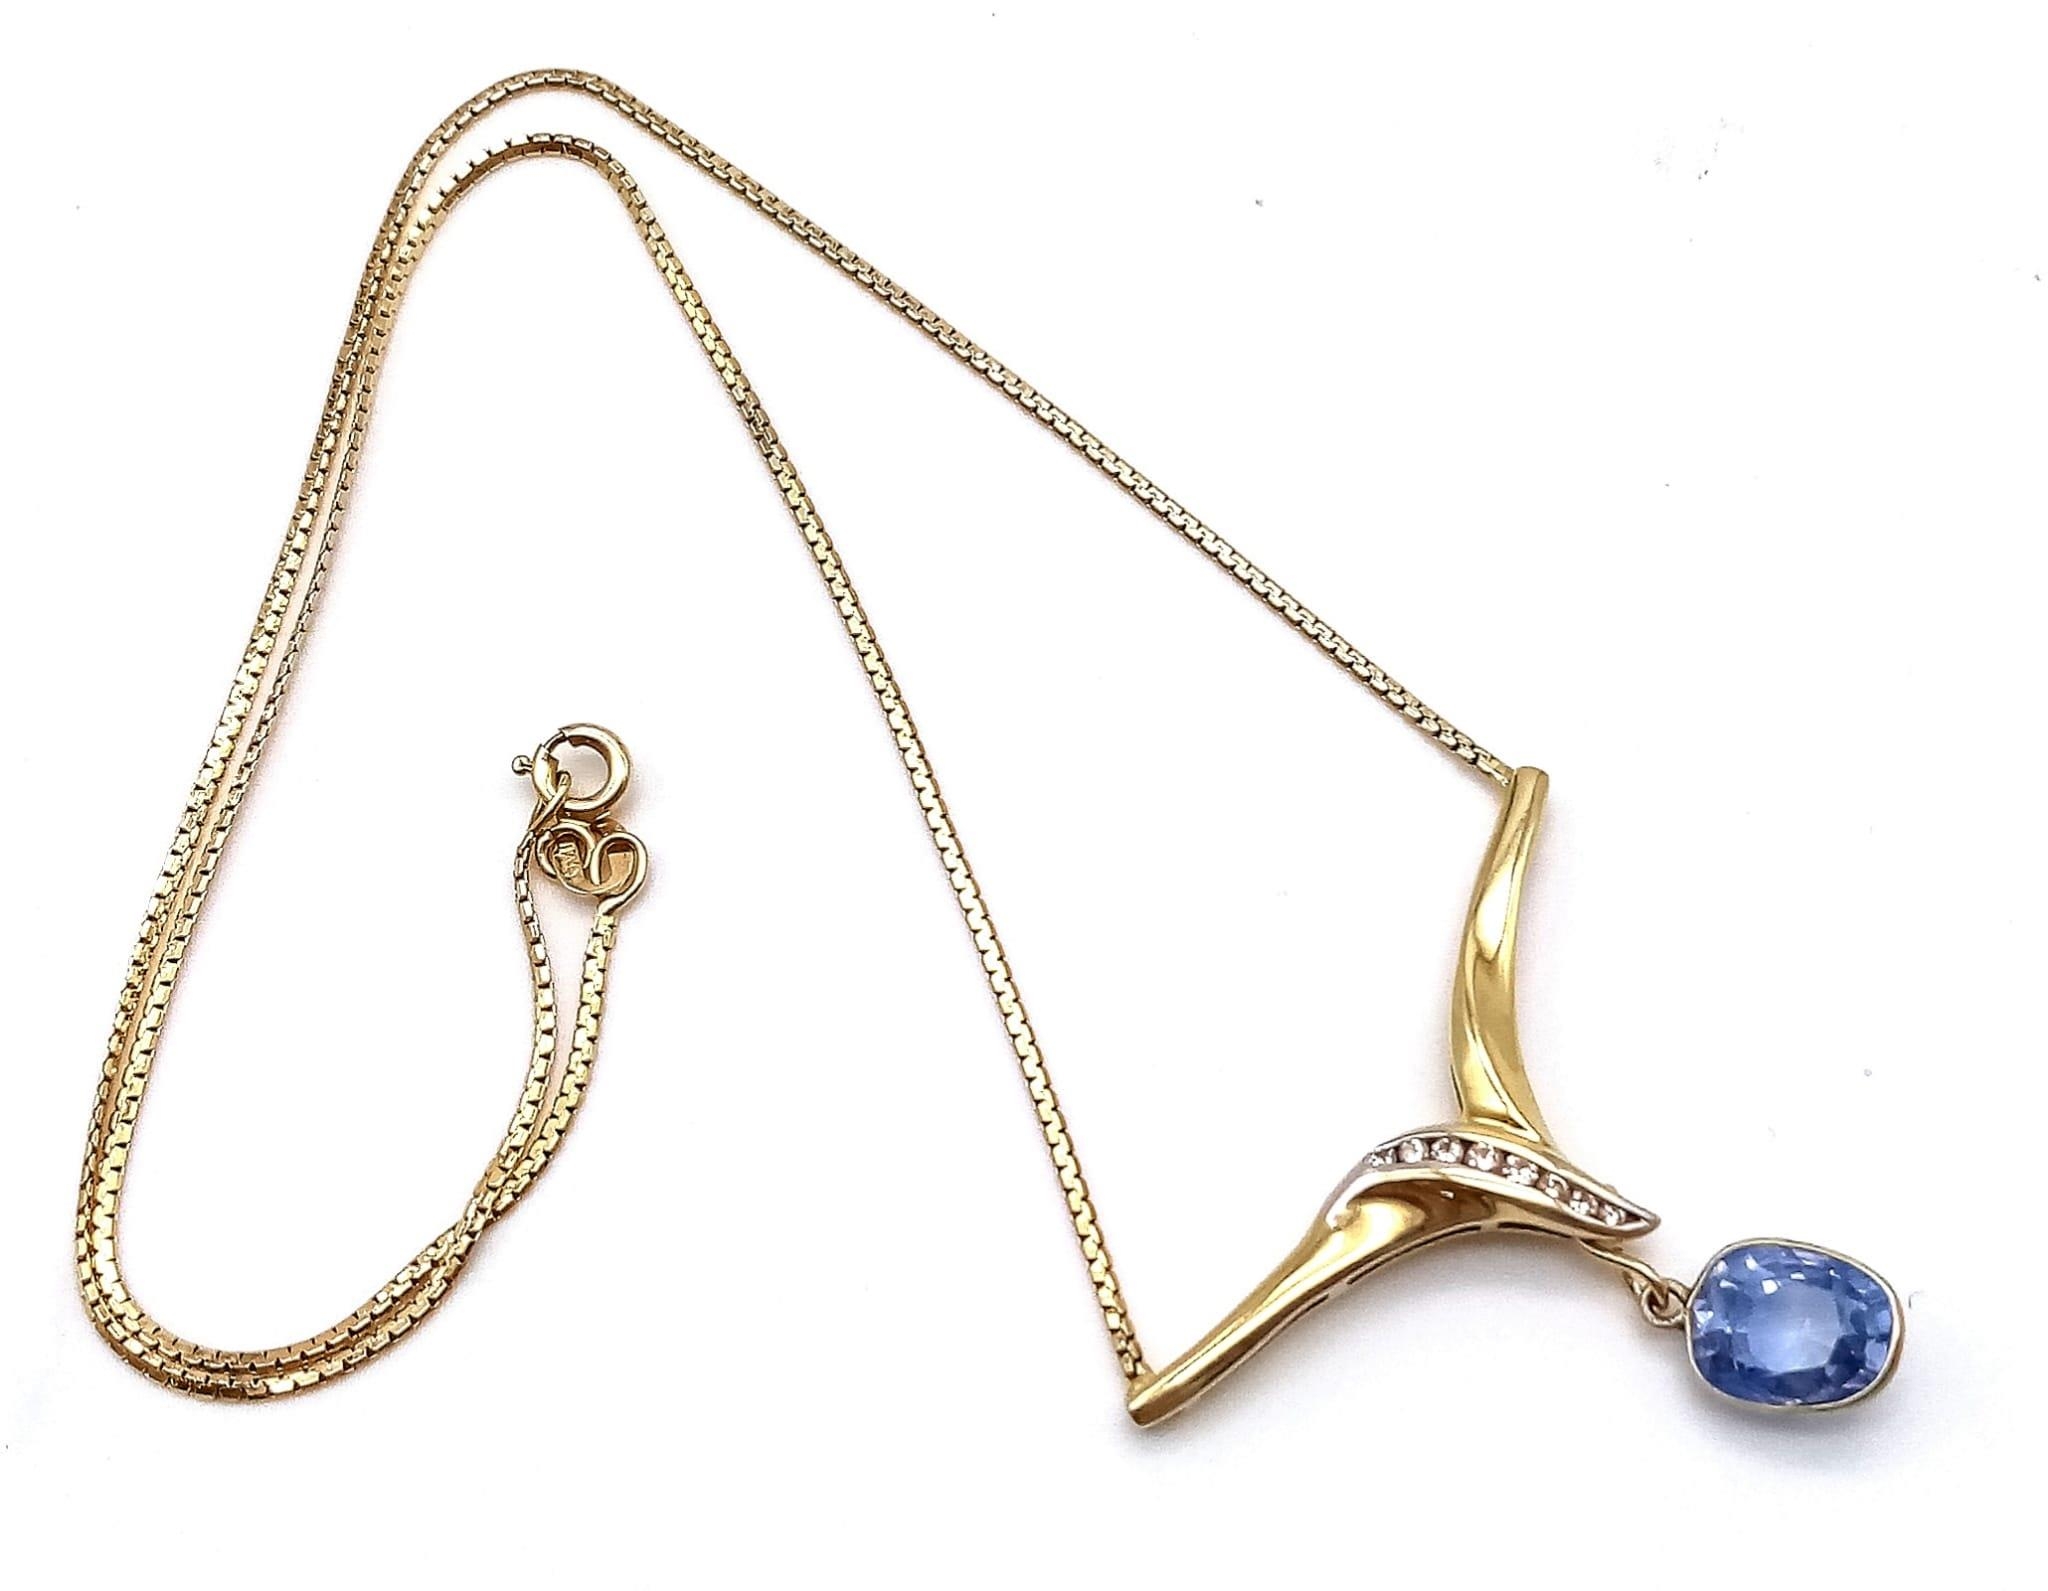 An Elegant 18K Yellow Gold Sapphire and Diamond Necklace. A delicate gold necklace with chevron